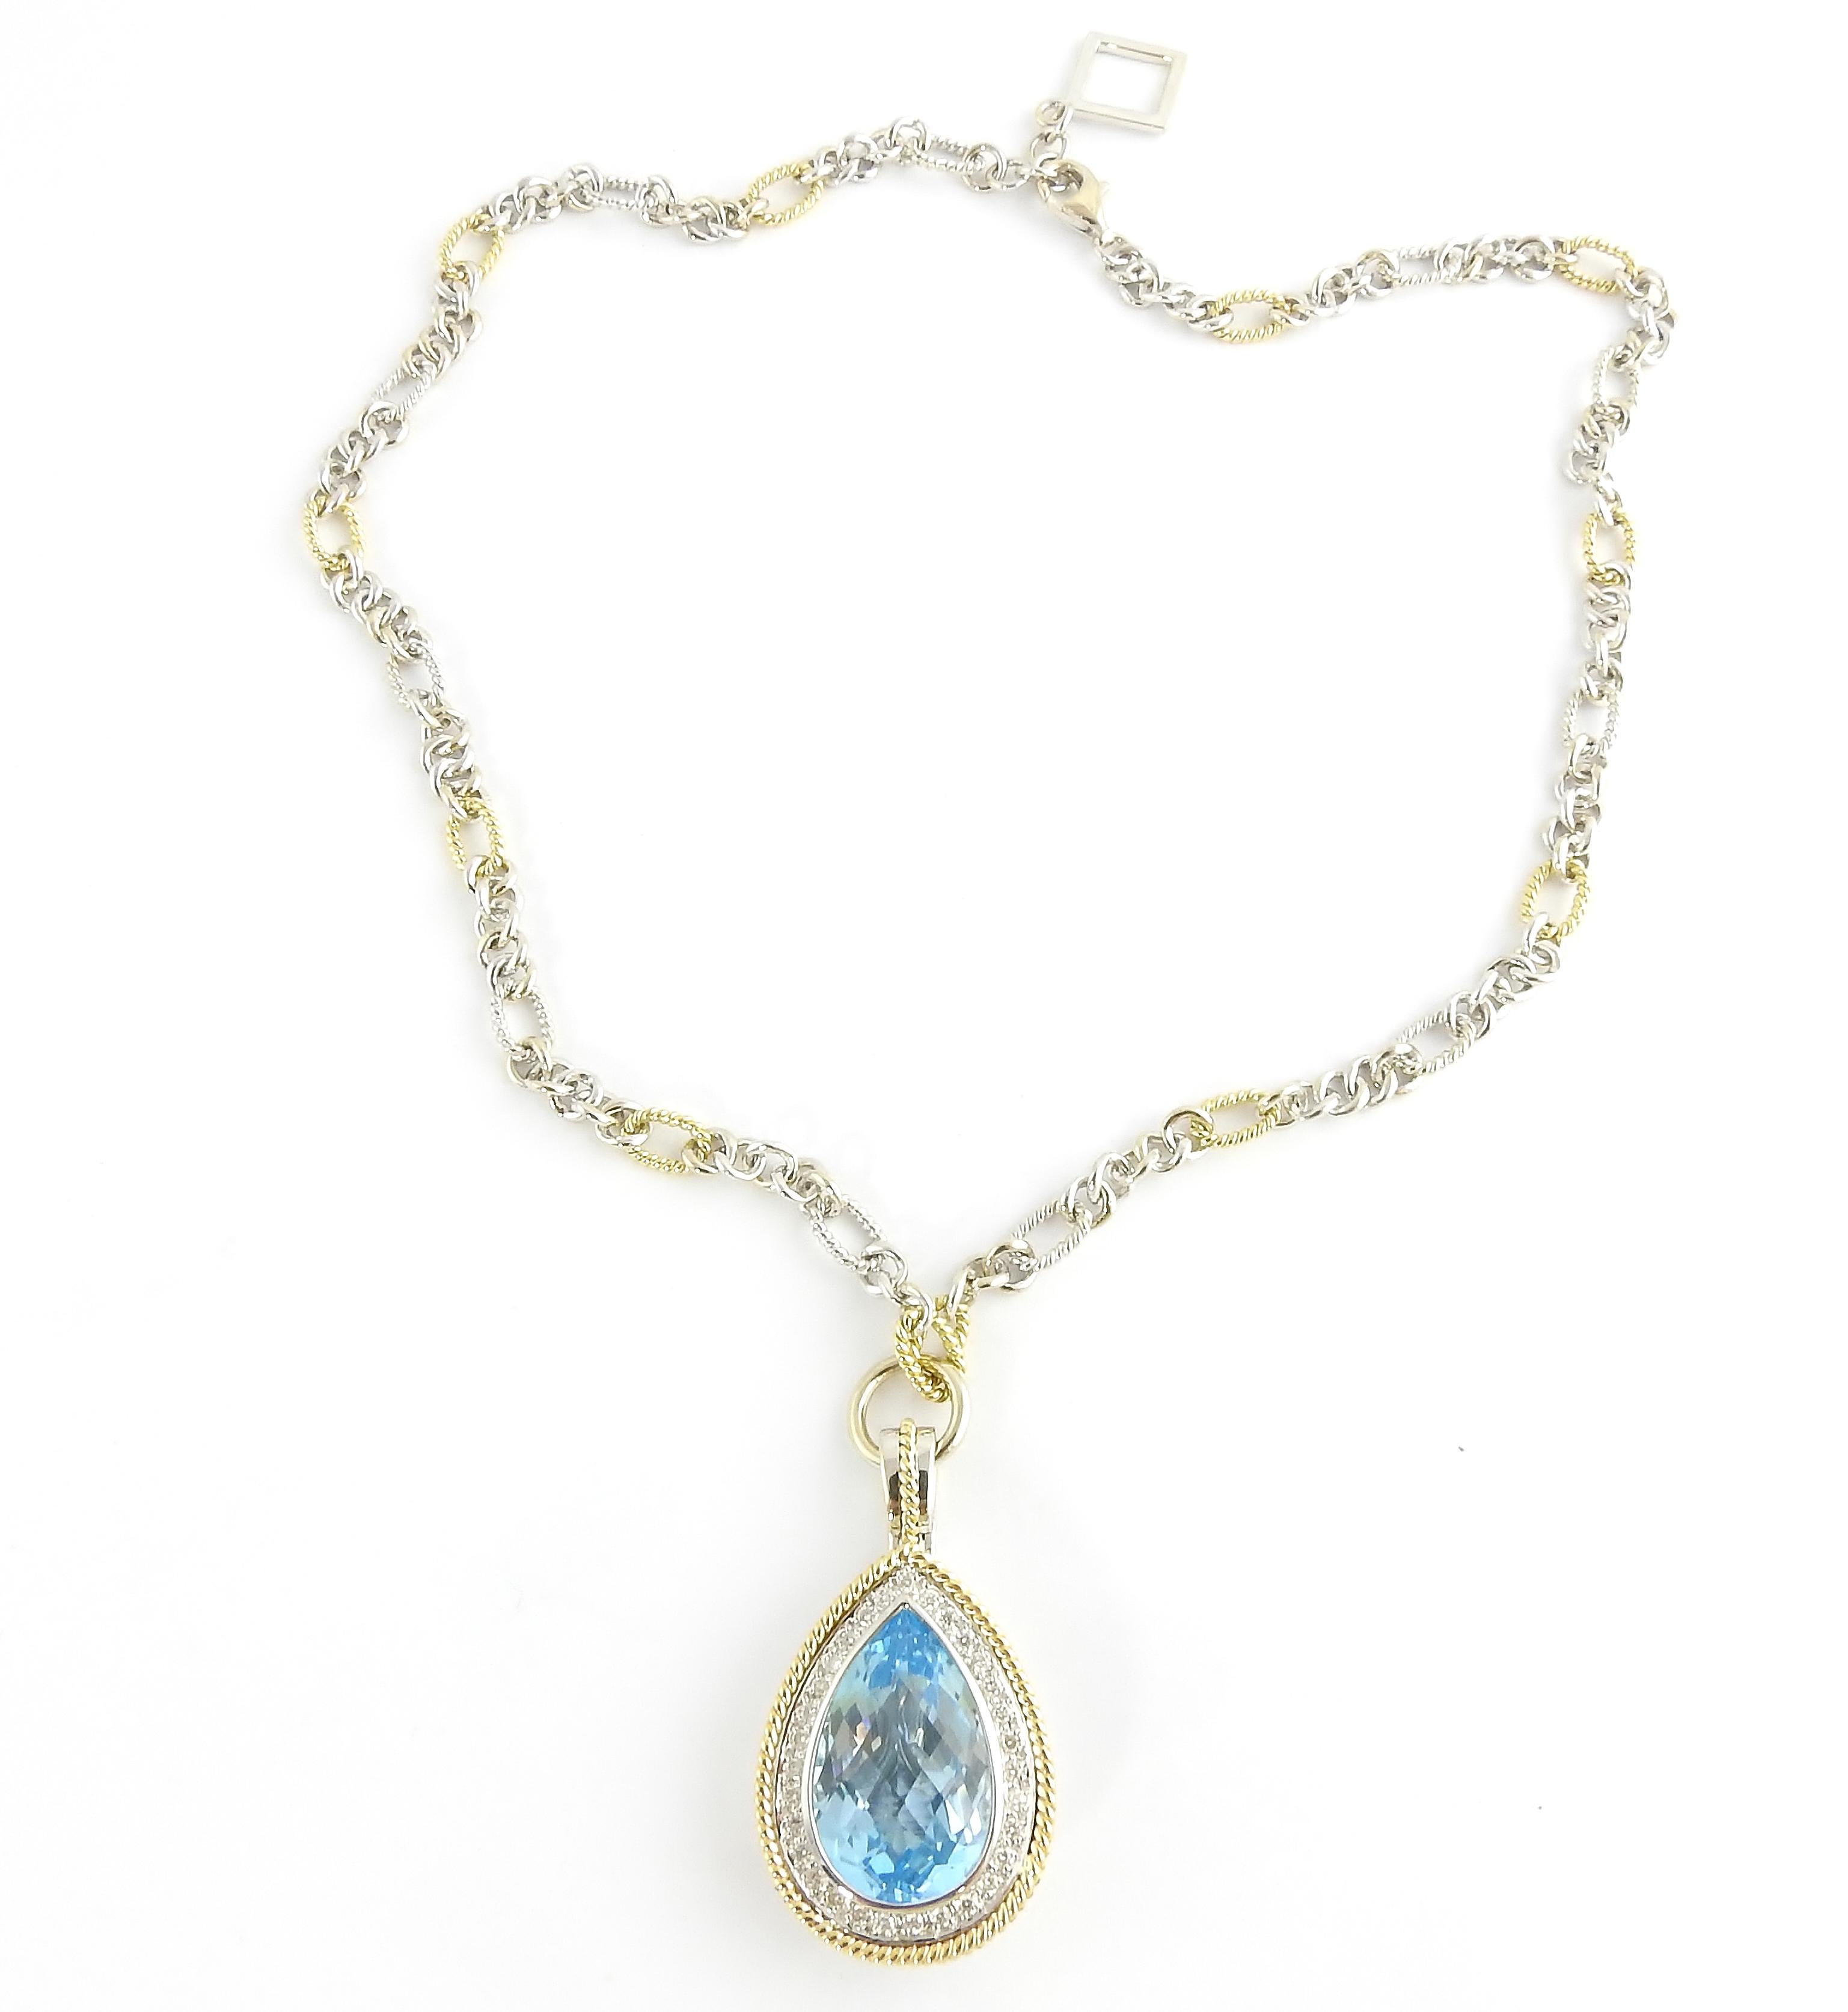 Vintage 18 Karat Yellow and White Gold Blue Topaz and Diamond Pendant Necklace-

This spectacular pendant features one pear-shaped blue topaz (21 mm x 13.5 mm) surrounded by 31 round brilliant cut diamonds and set in stunning yellow and white gold. 